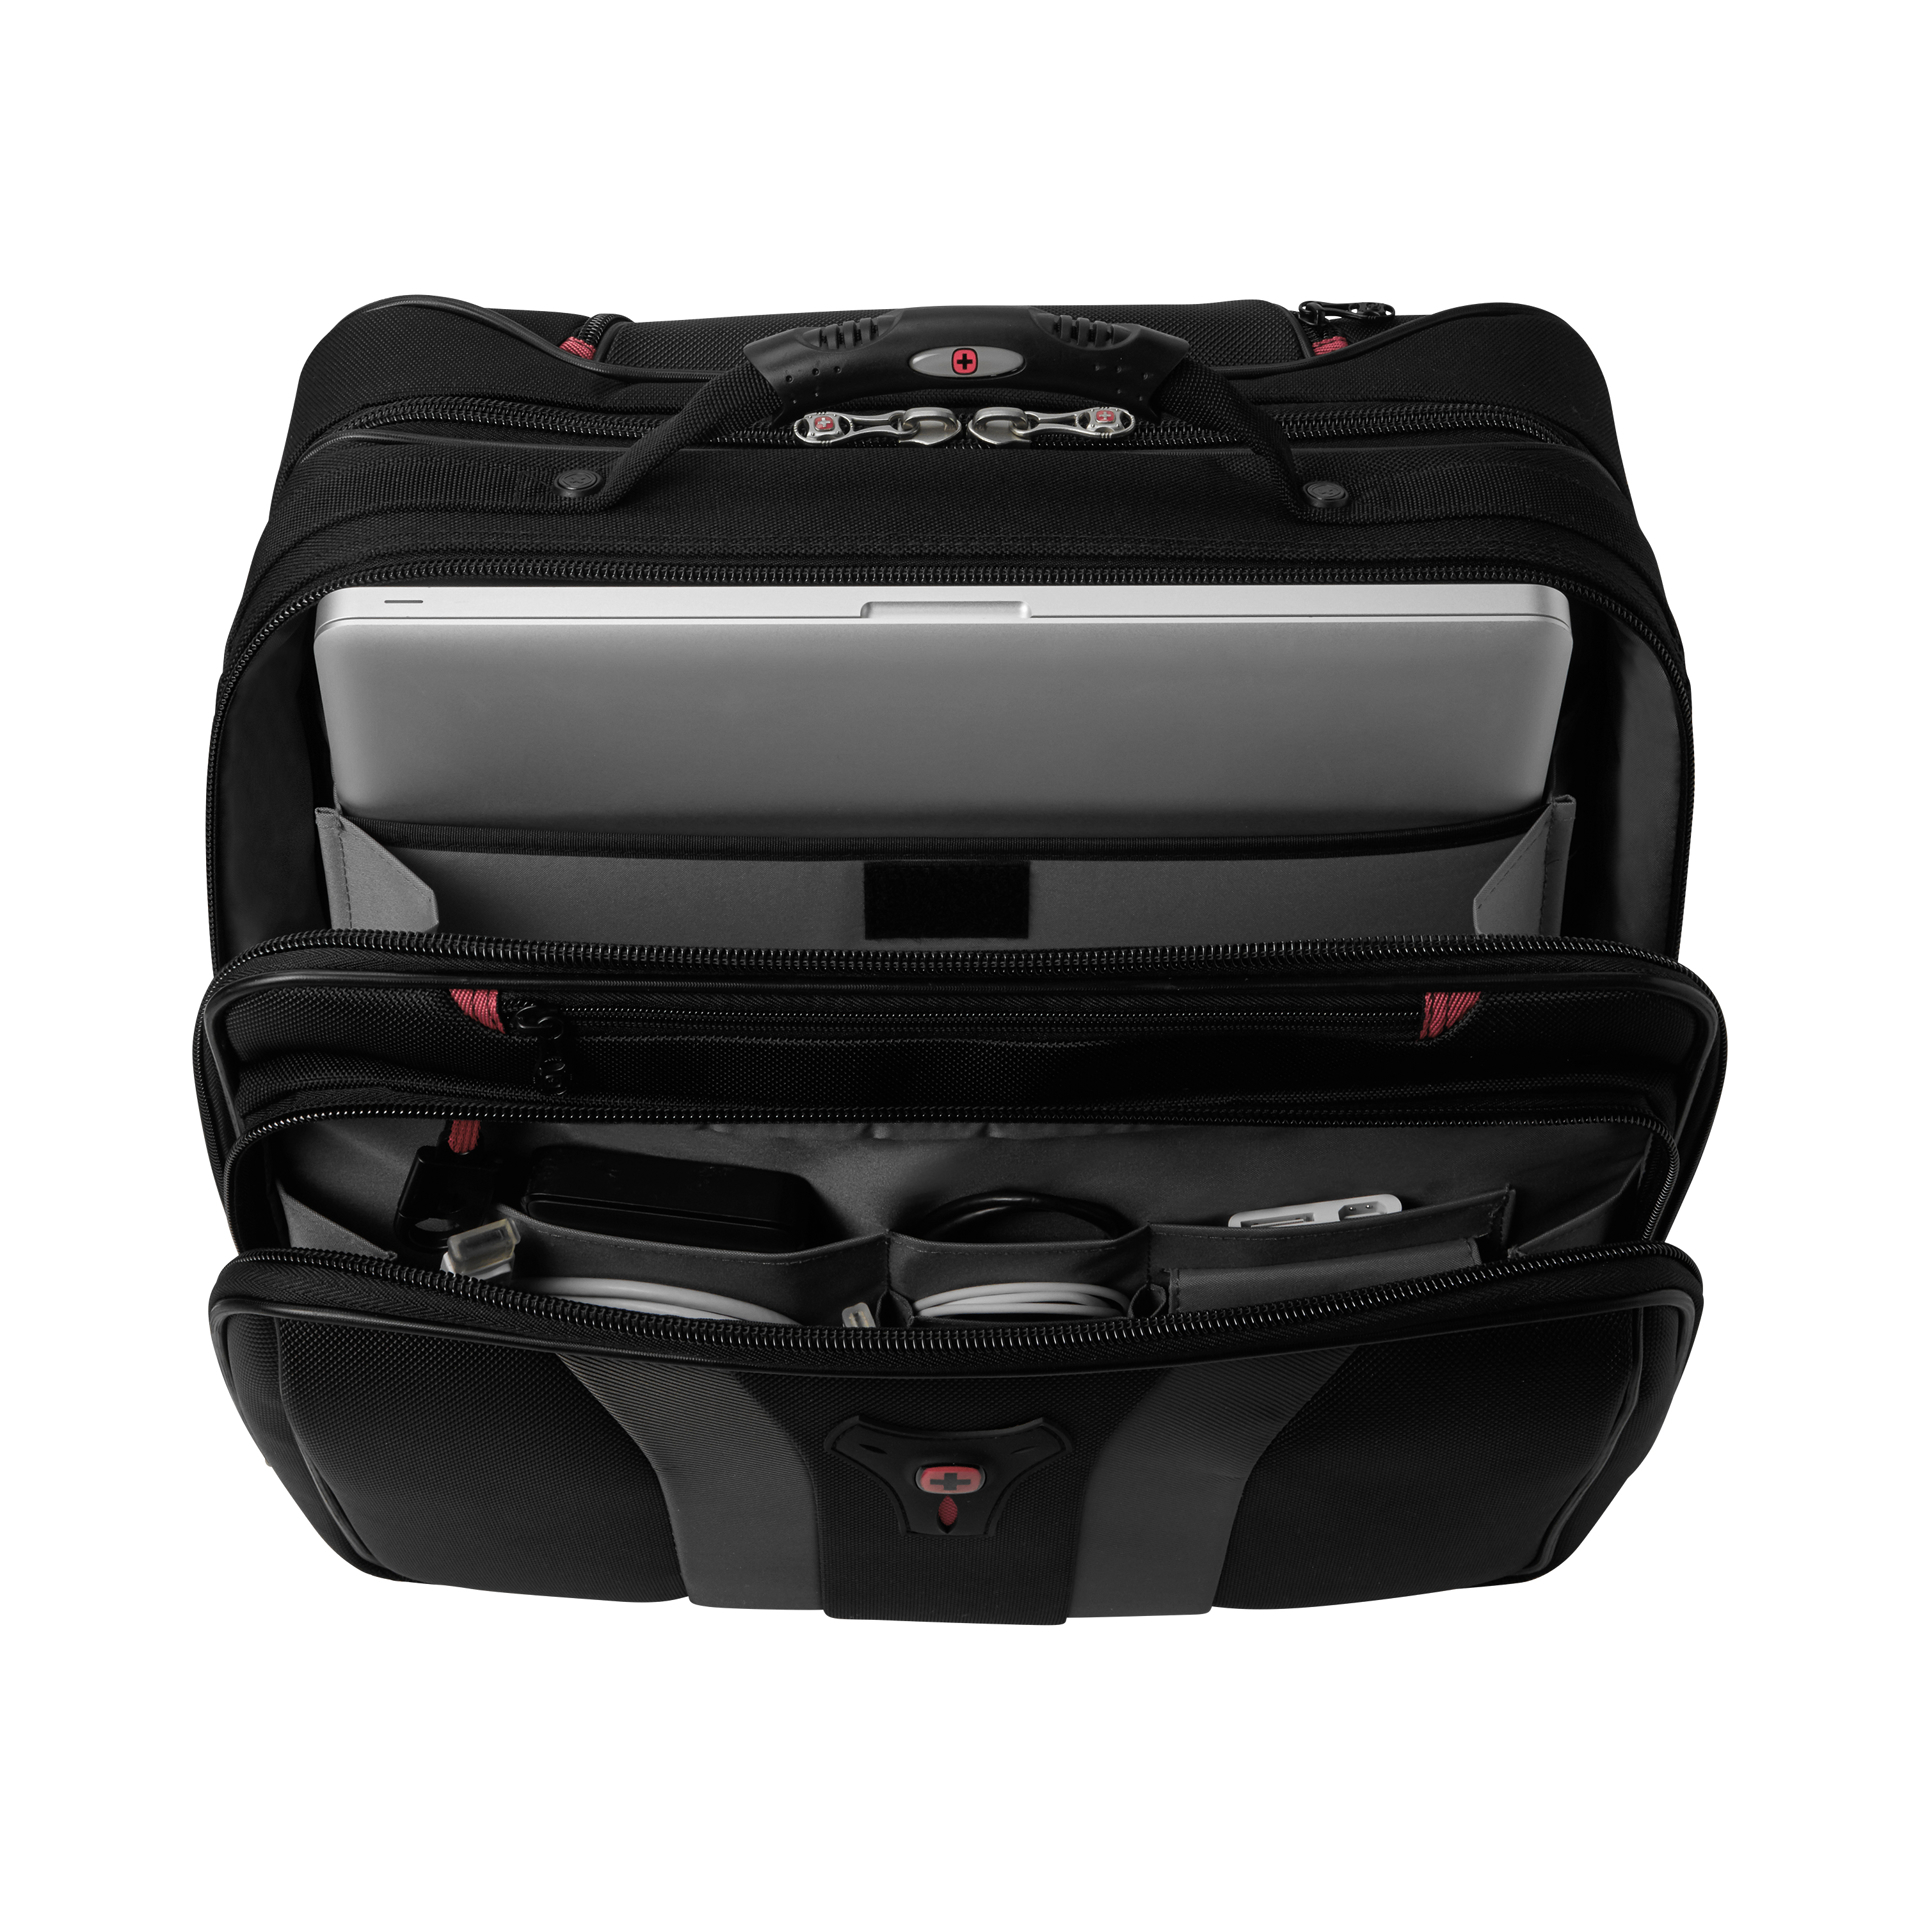 Wenger Granada Roller Travel Case showing inner compartments